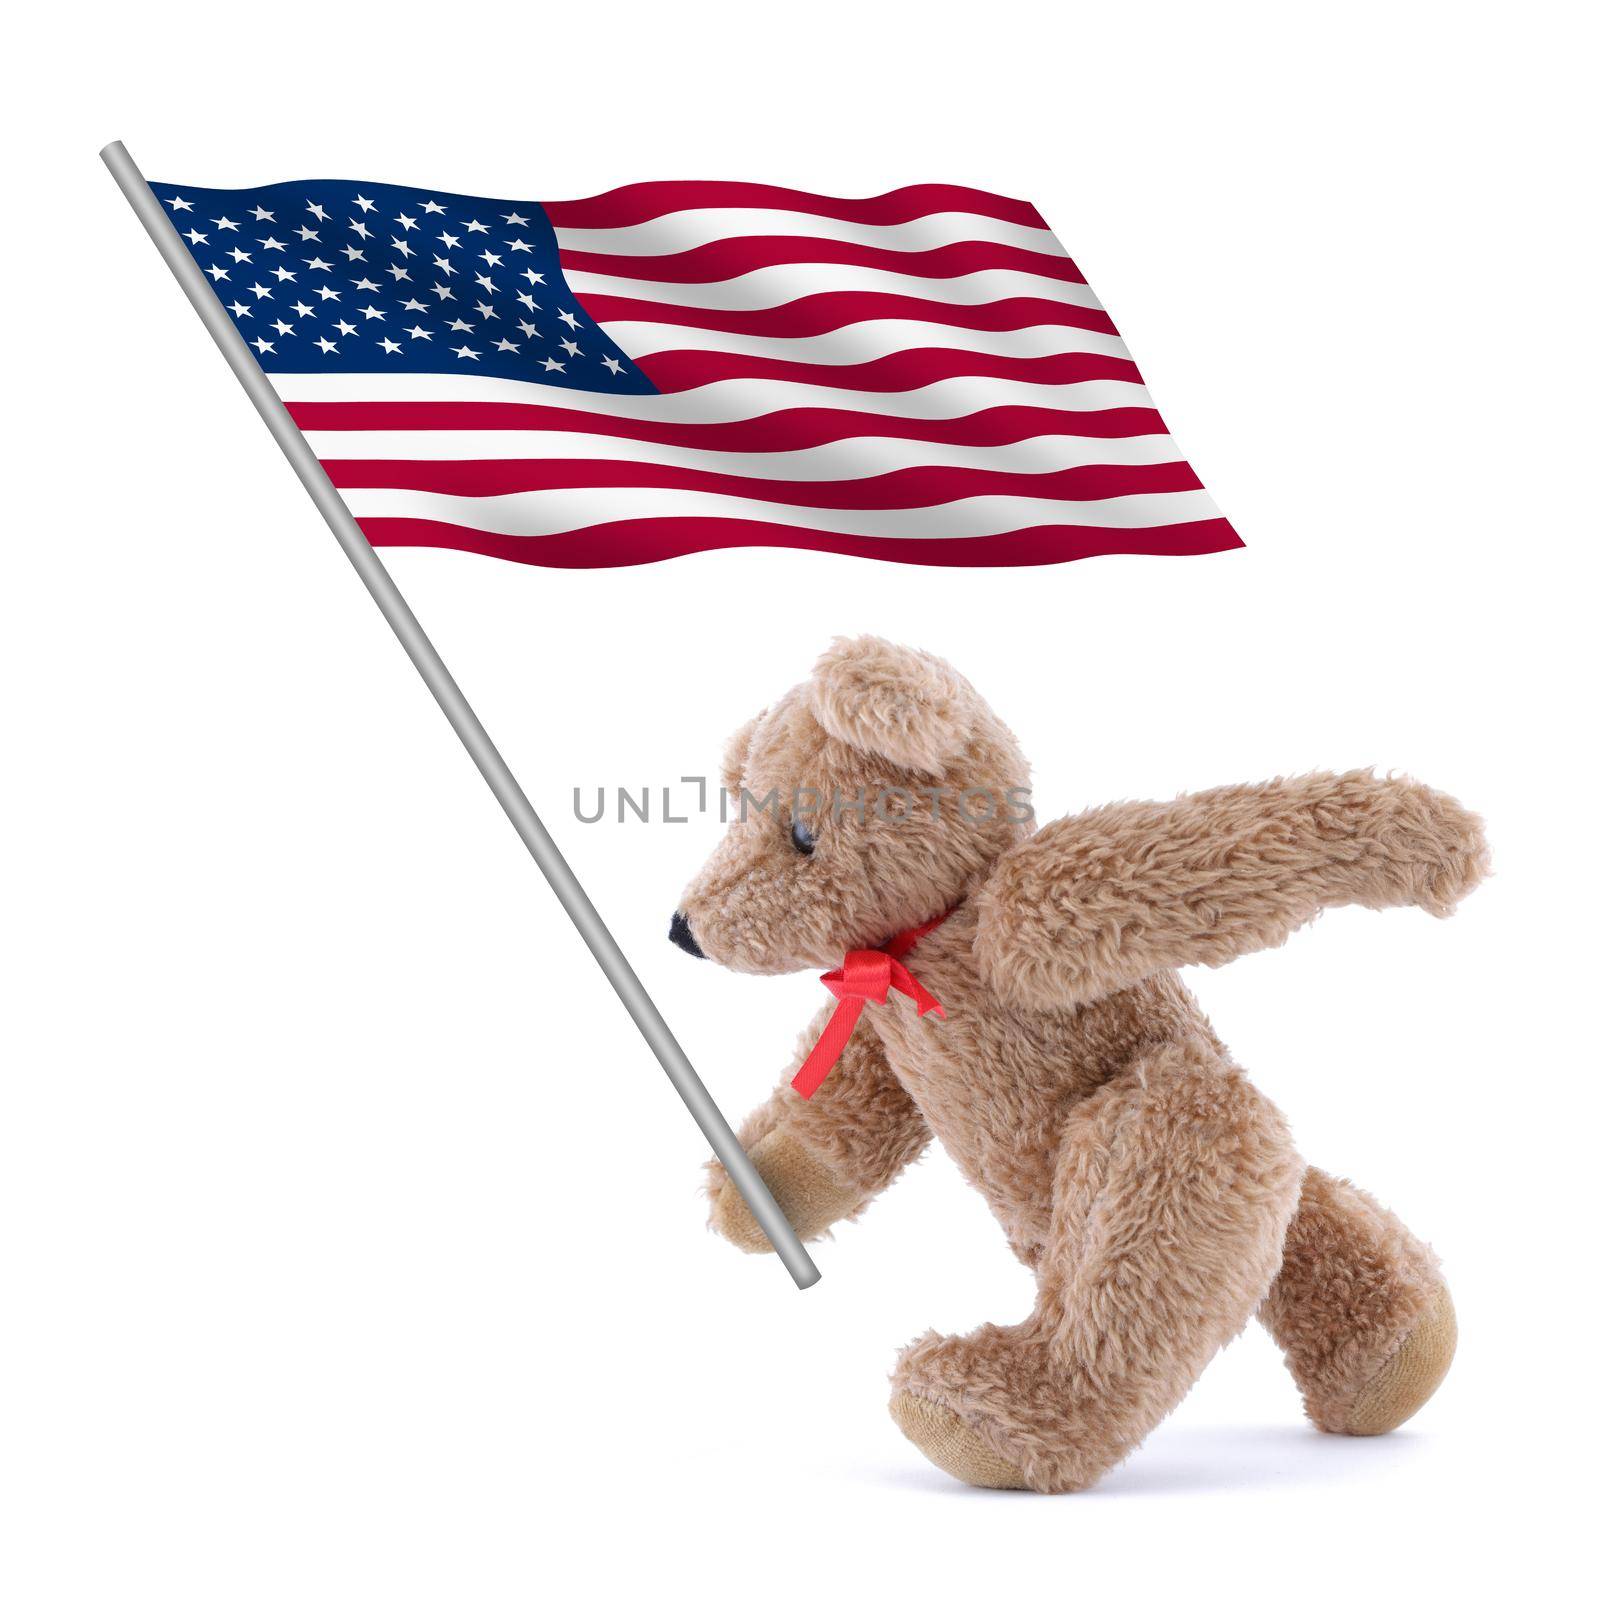 United states of America flag stars and stripes old glory being carried by a cute teddy bear by VivacityImages